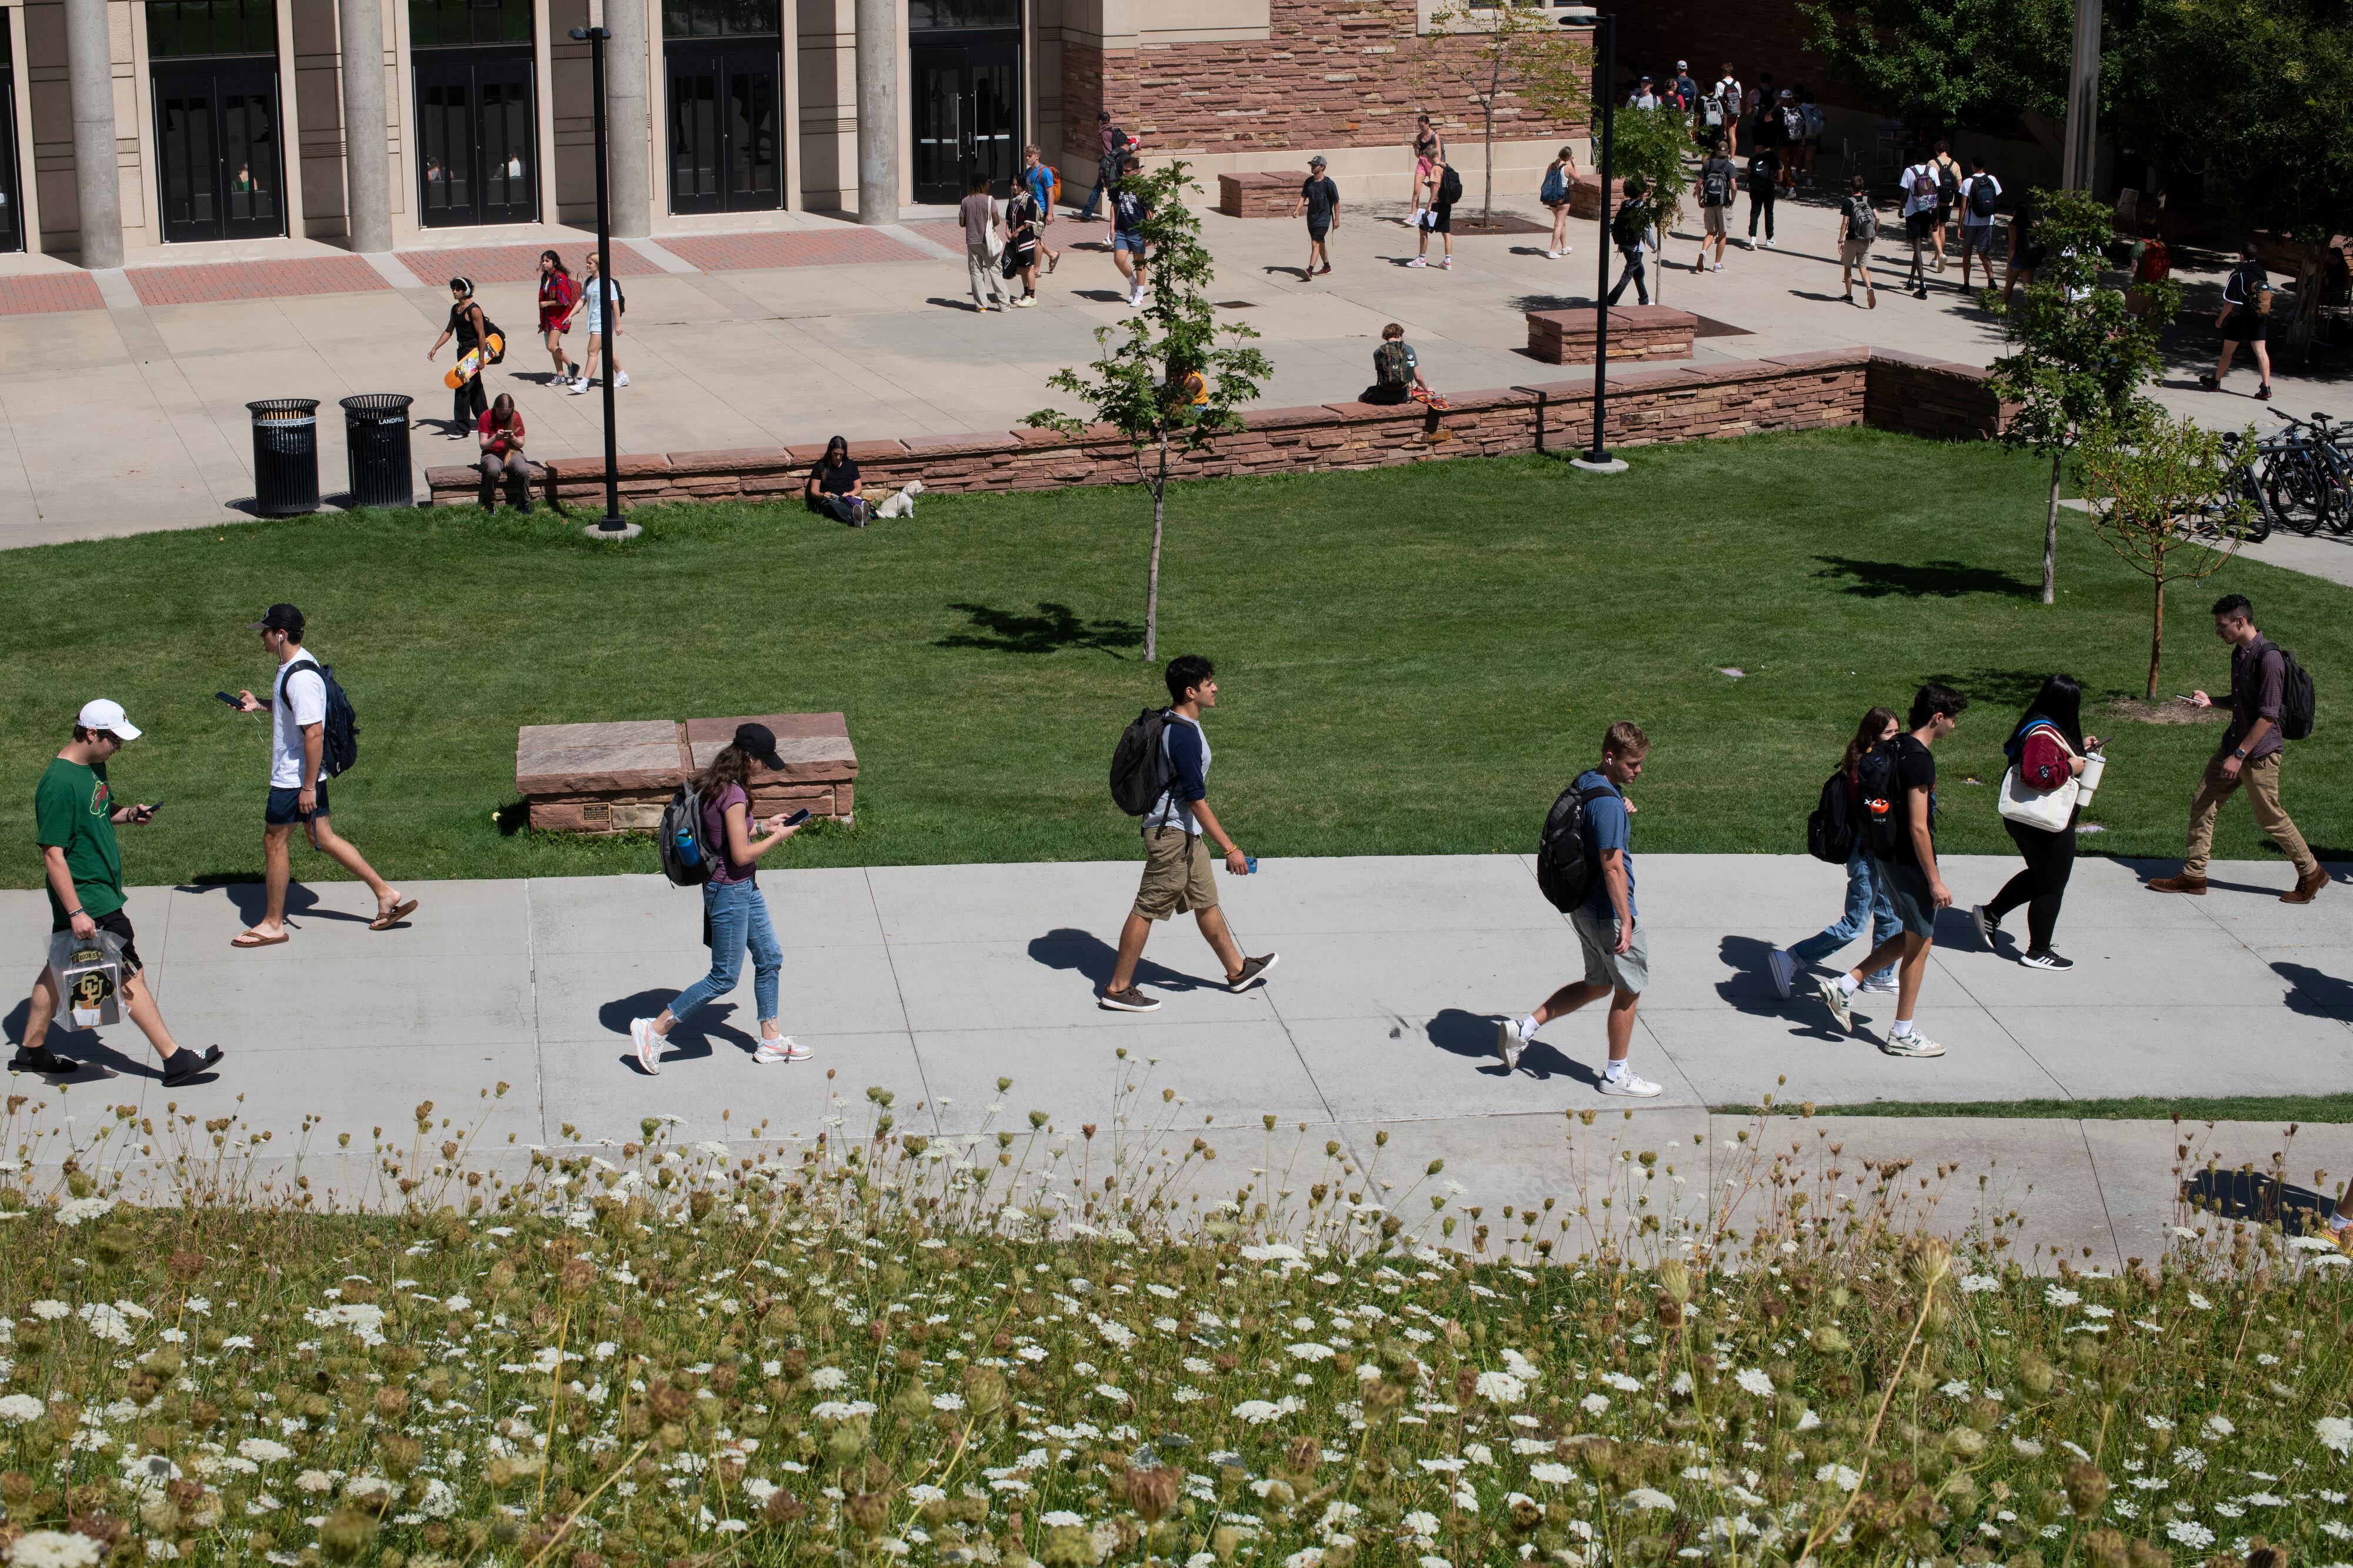 Students walk on a sidewalk path with brick buildings in the background.